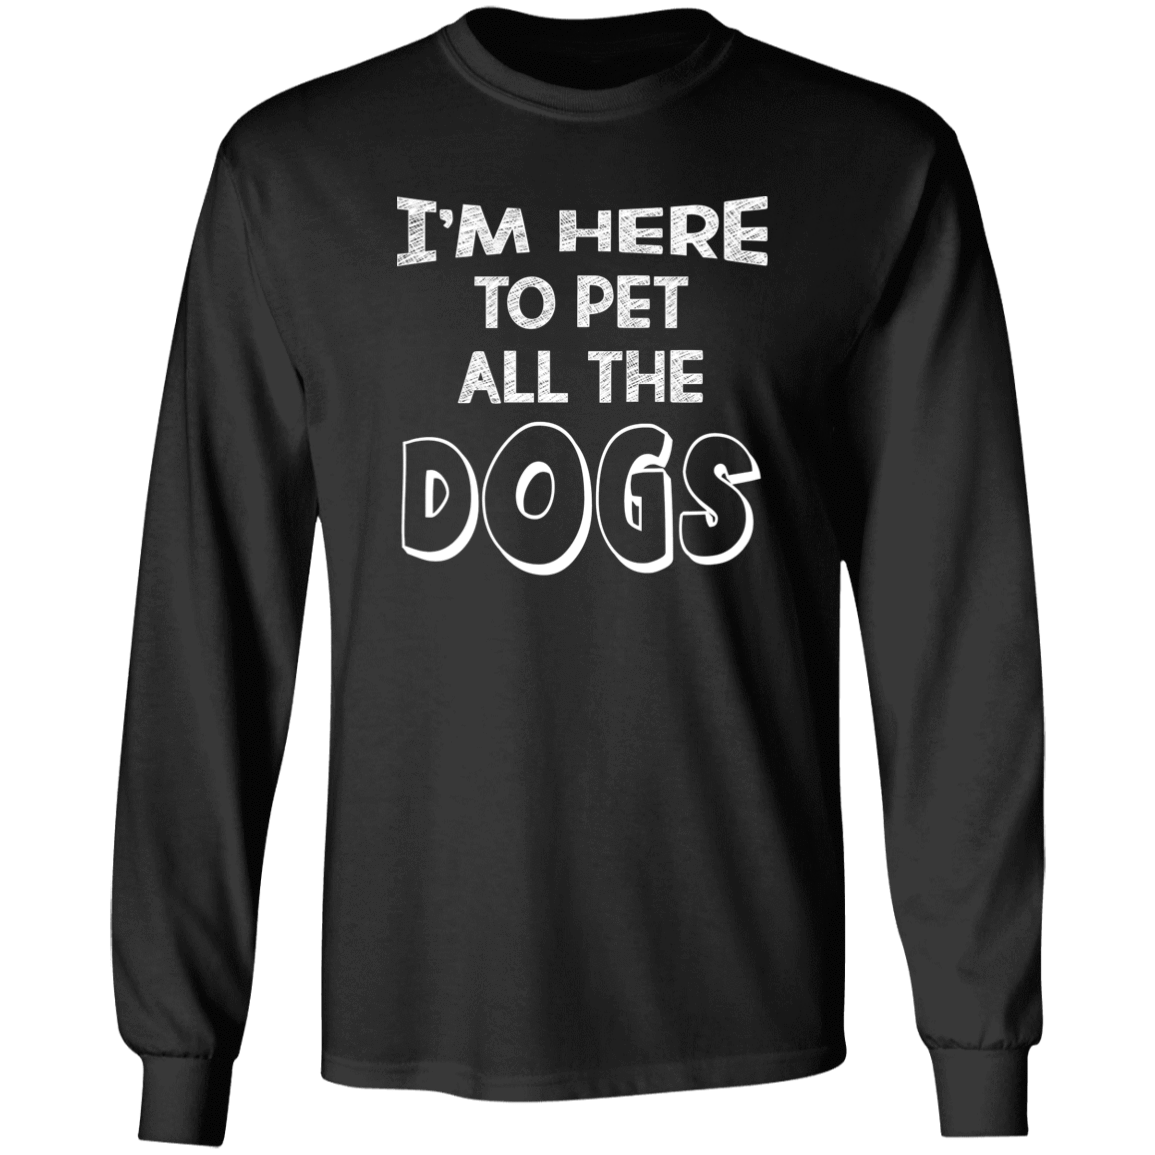 I'm Here To Pet All The Dogs - Long Sleeve T Shirt.